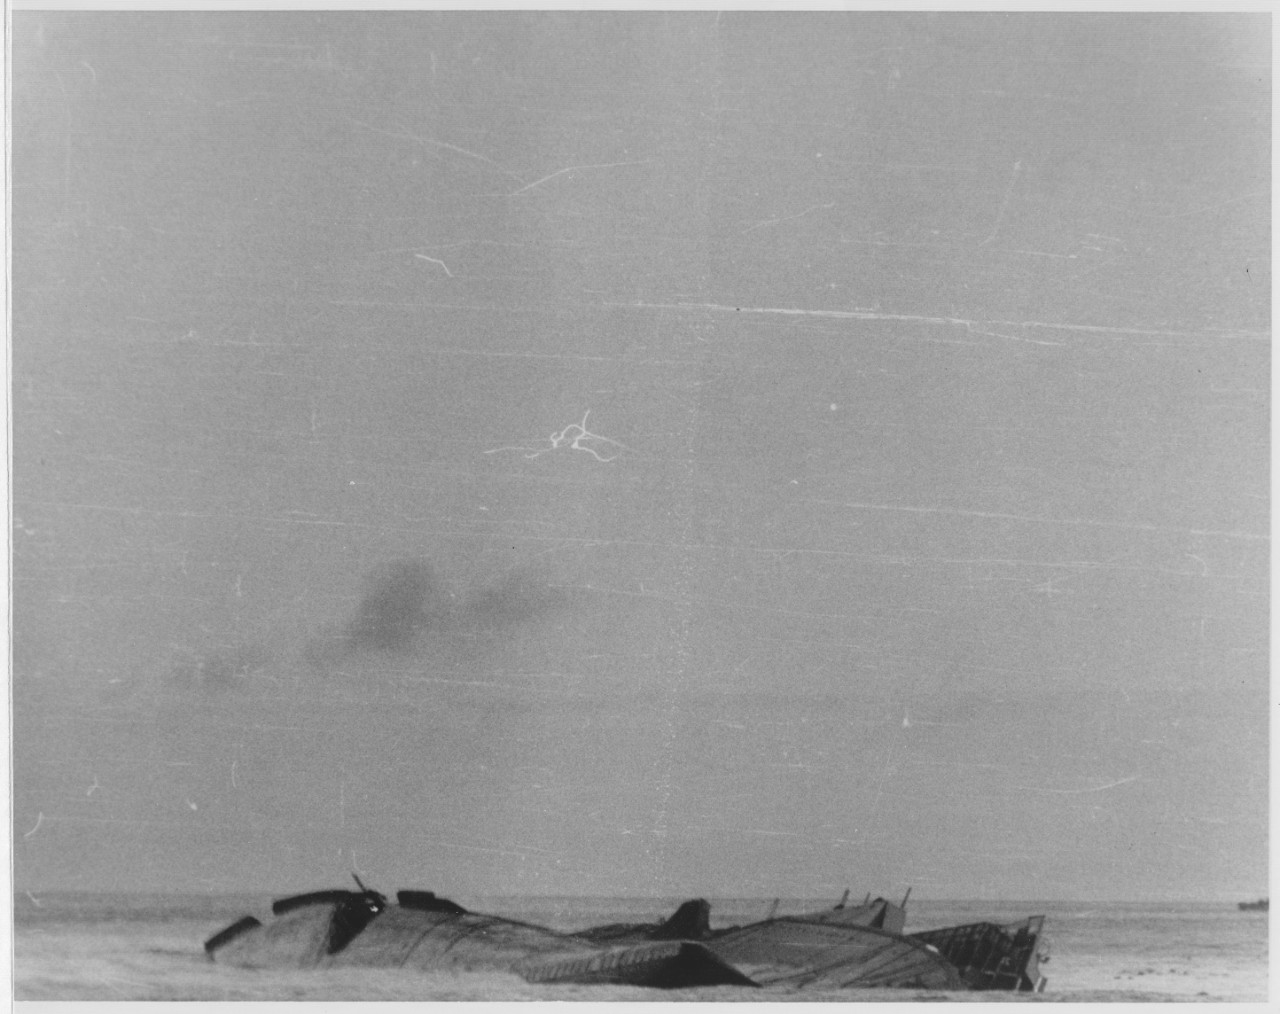 Photo #: NH 95576  Battle of Midway, June 1942